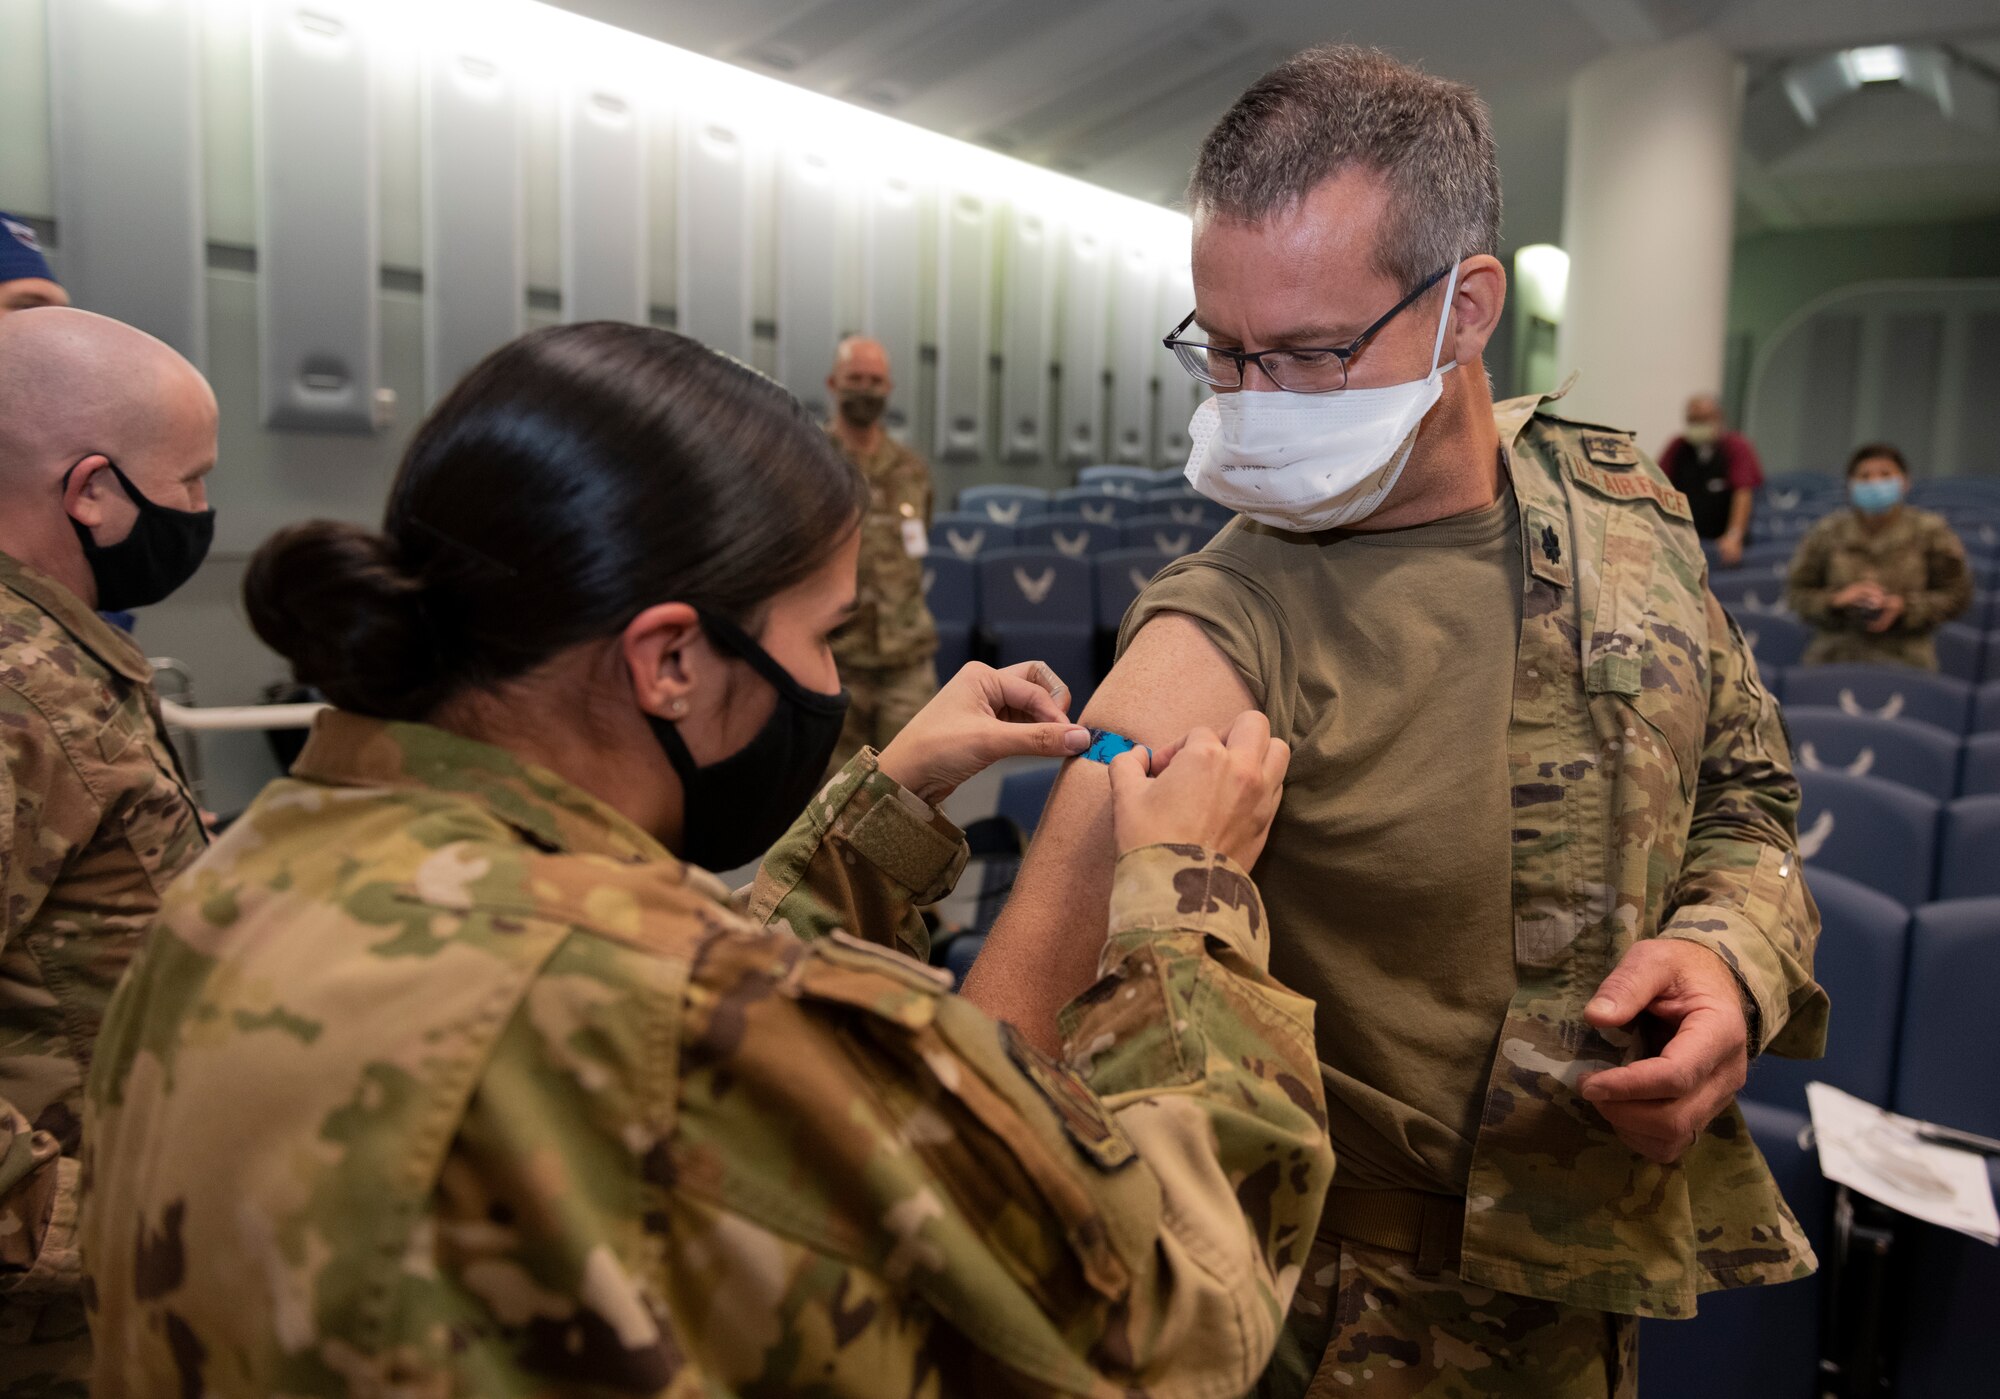 U.S. Air Force Tech. Sgt. Yadira Wood, 60th Aeromedical Evacuation Squadron aerospace medical technician, places a band aid on the right arm of Lt. Col. Joseph Sky, 60th Surgical Squadron chief of medical staff, after administering the COVID-19 vaccine to Sky Dec. 22, 2020, at Travis Air Force Base, California. David Grant U.S. Air Force Medical Center is the largest Air Force medical facility and provides care to more than 276,000 Department of Defense and Veteran Affairs eligible beneficiaries. Essential medical personnel from the 60th Medical Group were the first to receive the vaccine at Travis AFB. (U.S. Air Force photo by Senior Airman Cameron Otte)